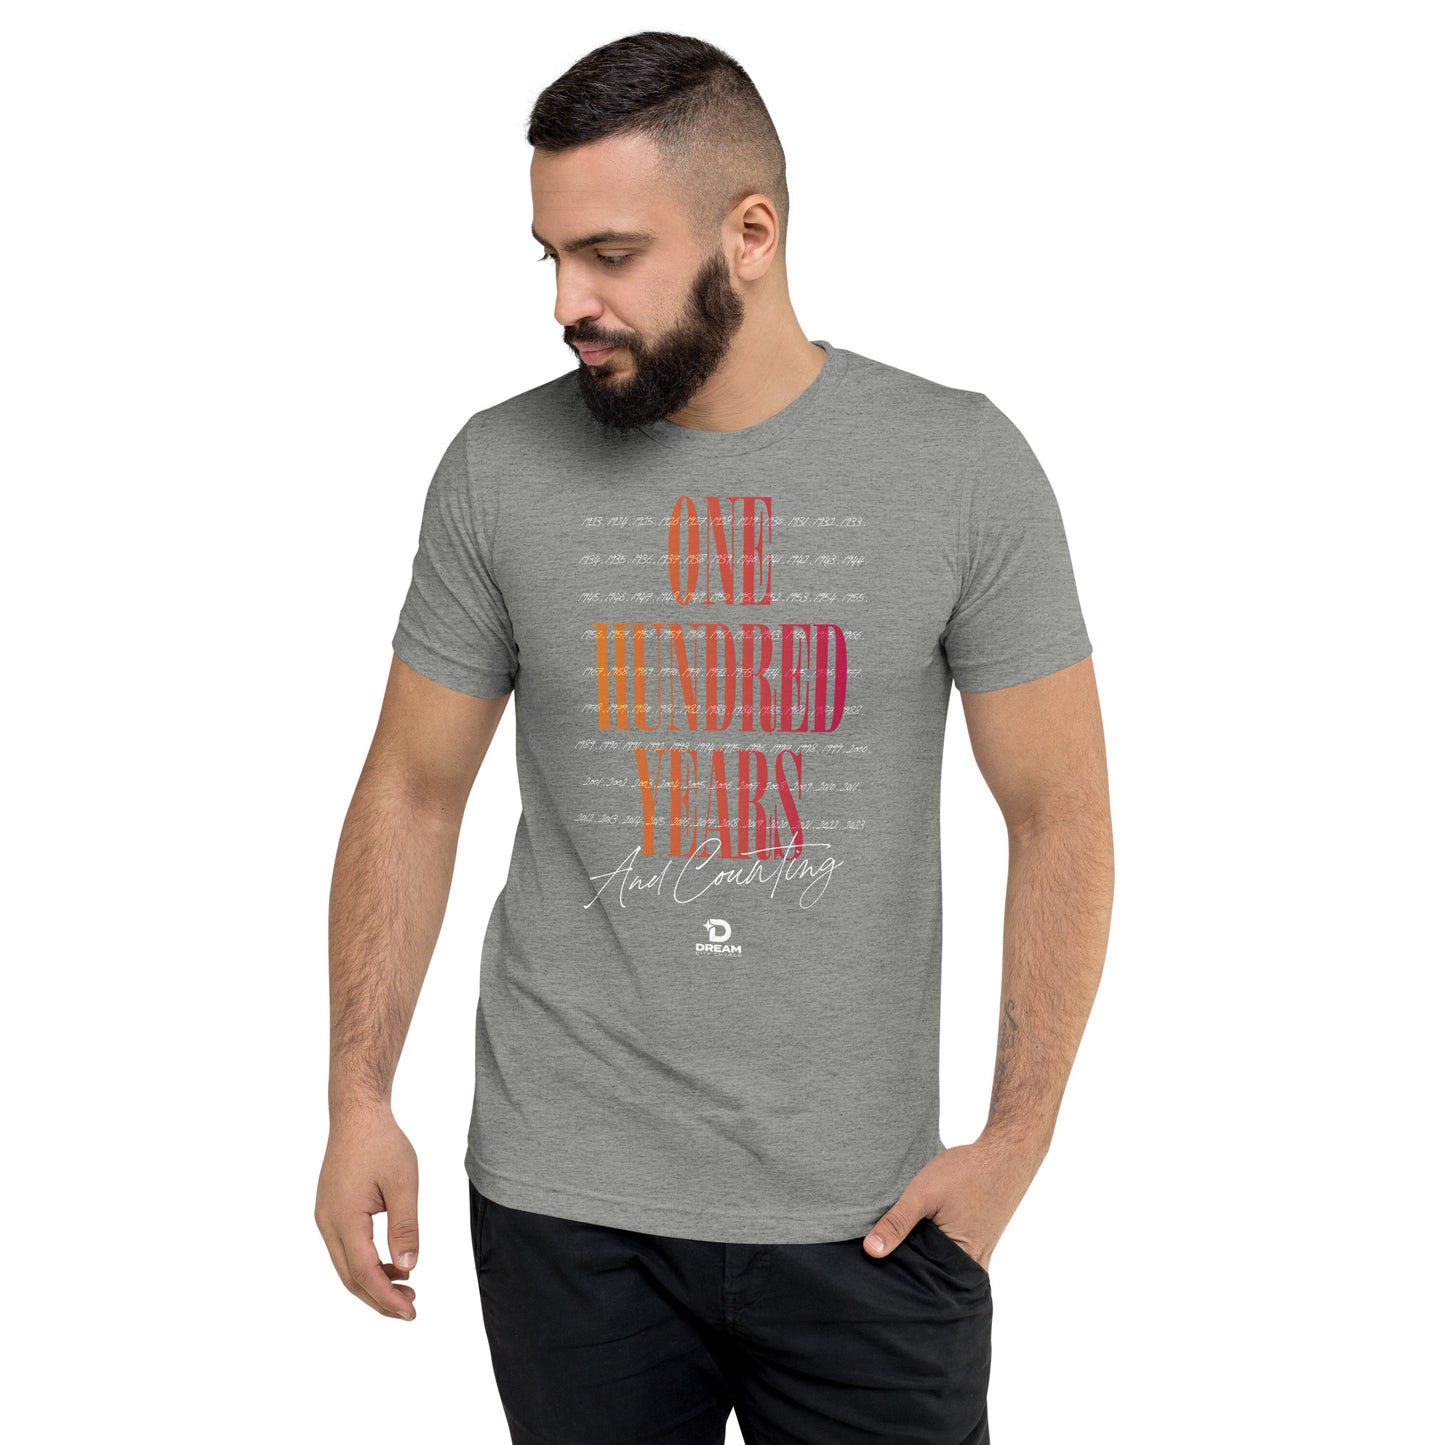 One Hundred Years and Counting - Short sleeve t-shirt